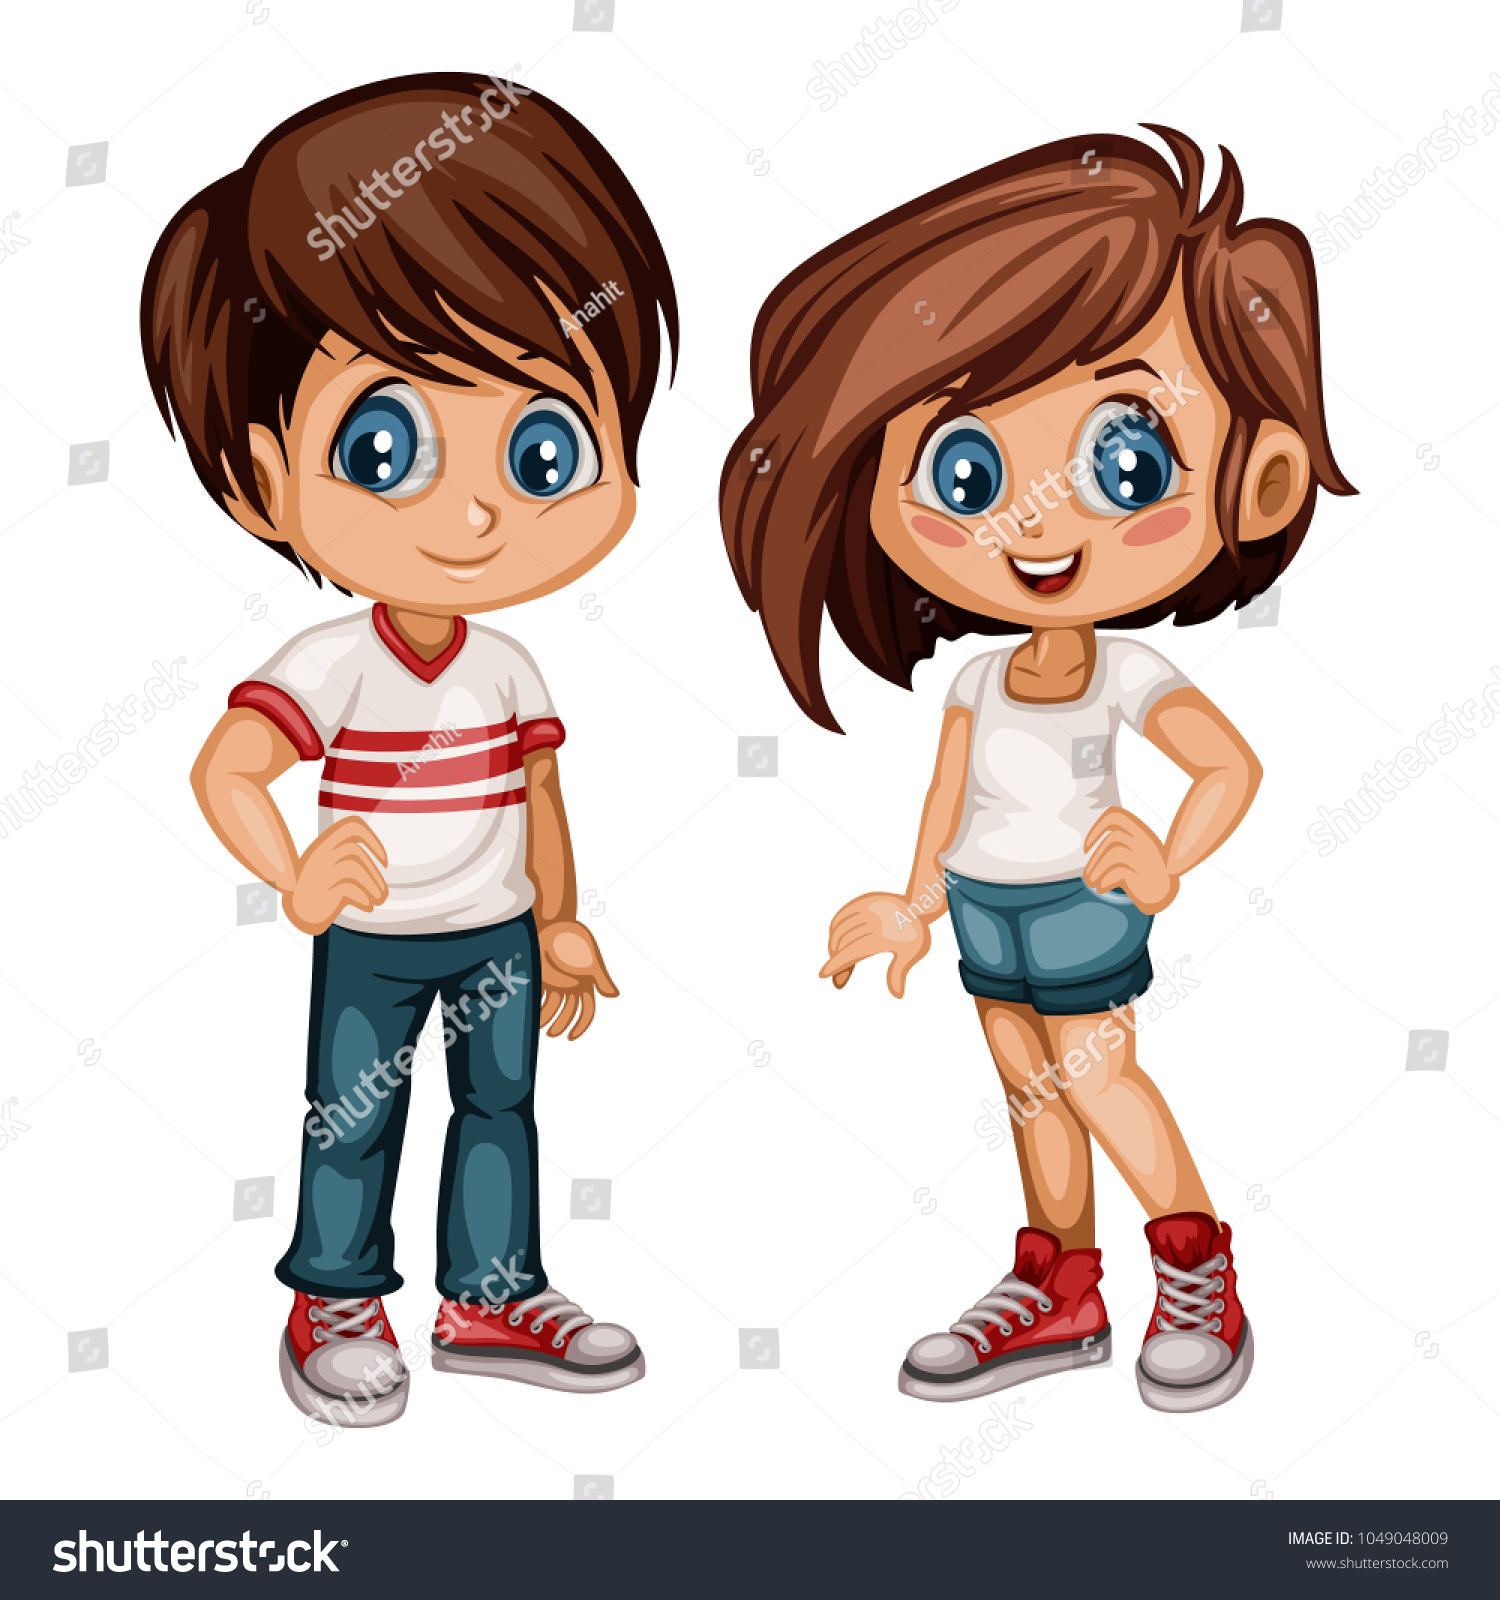 salvage Unjust is enough Cute Cartoon Boy Girl Sport Clothes Stock Vector (Royalty Free) 1049048009  | Shutterstock